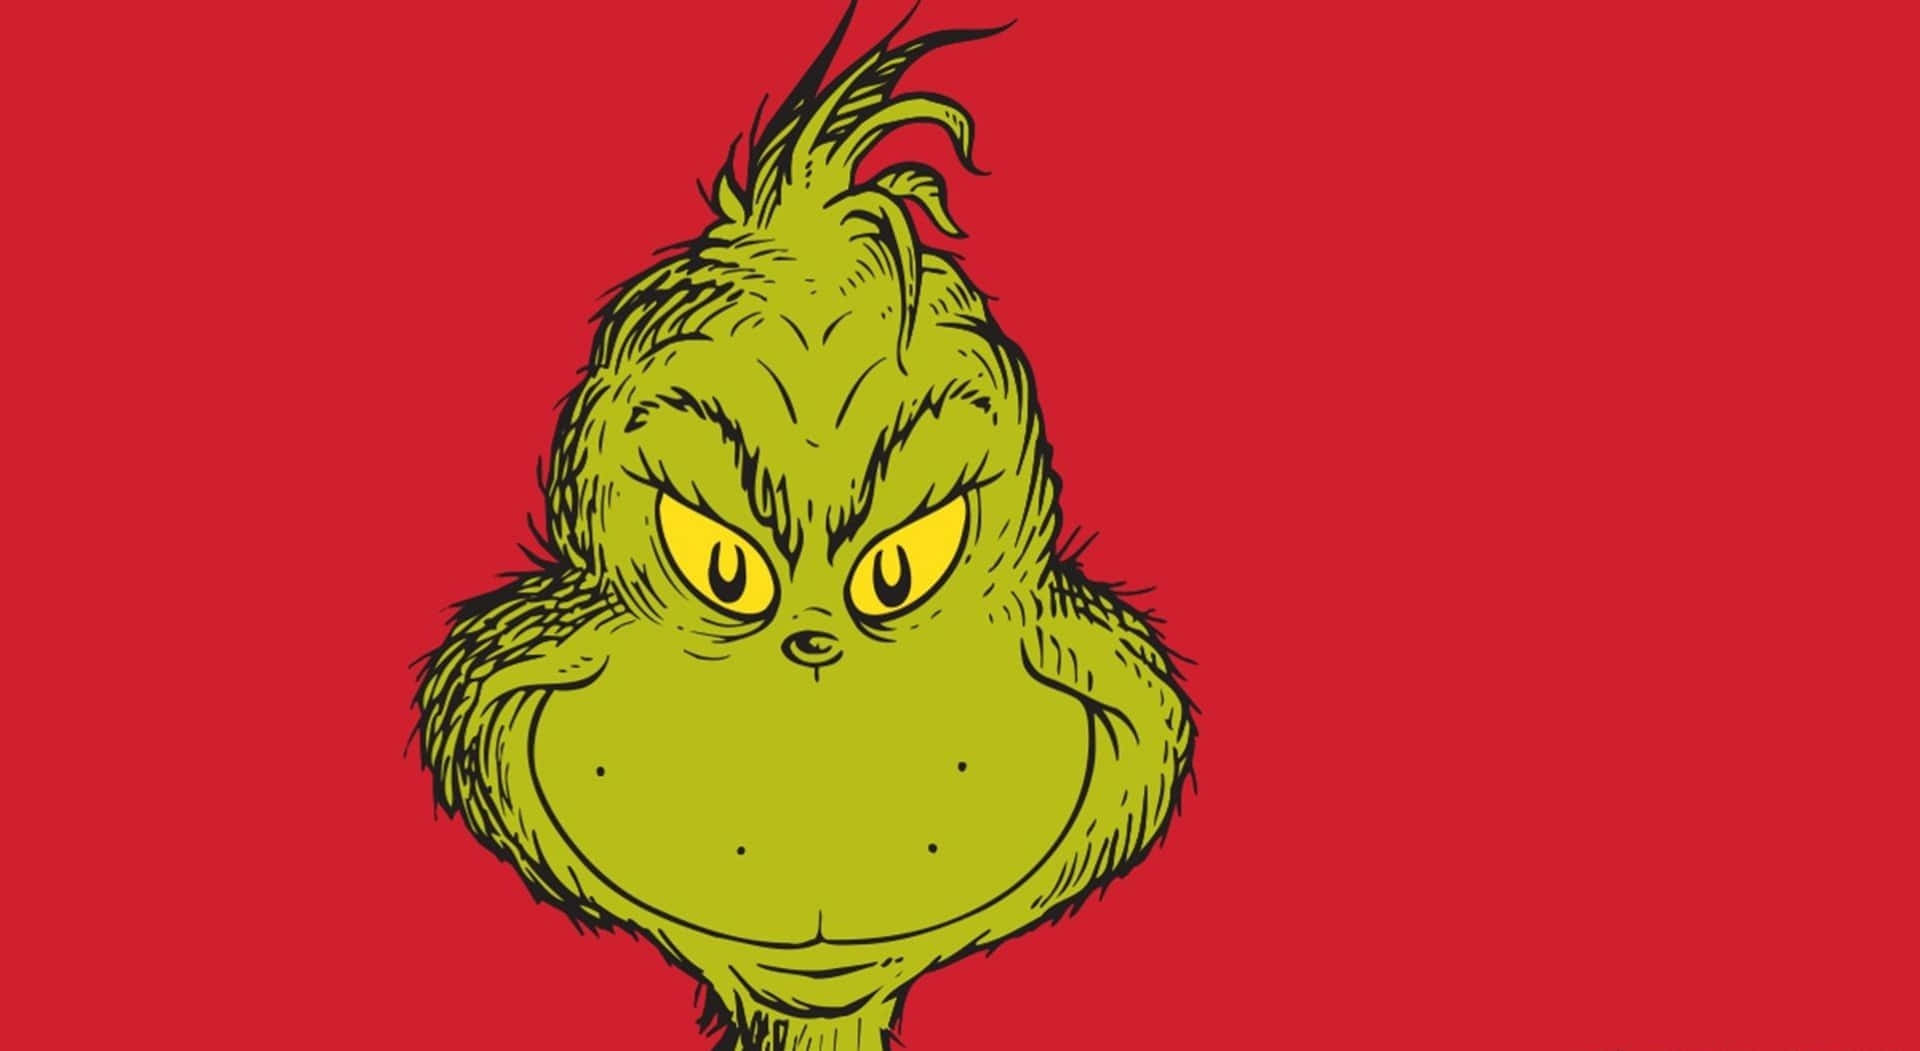 The Grinch Fictional Character By Dr. Seuss Wallpaper